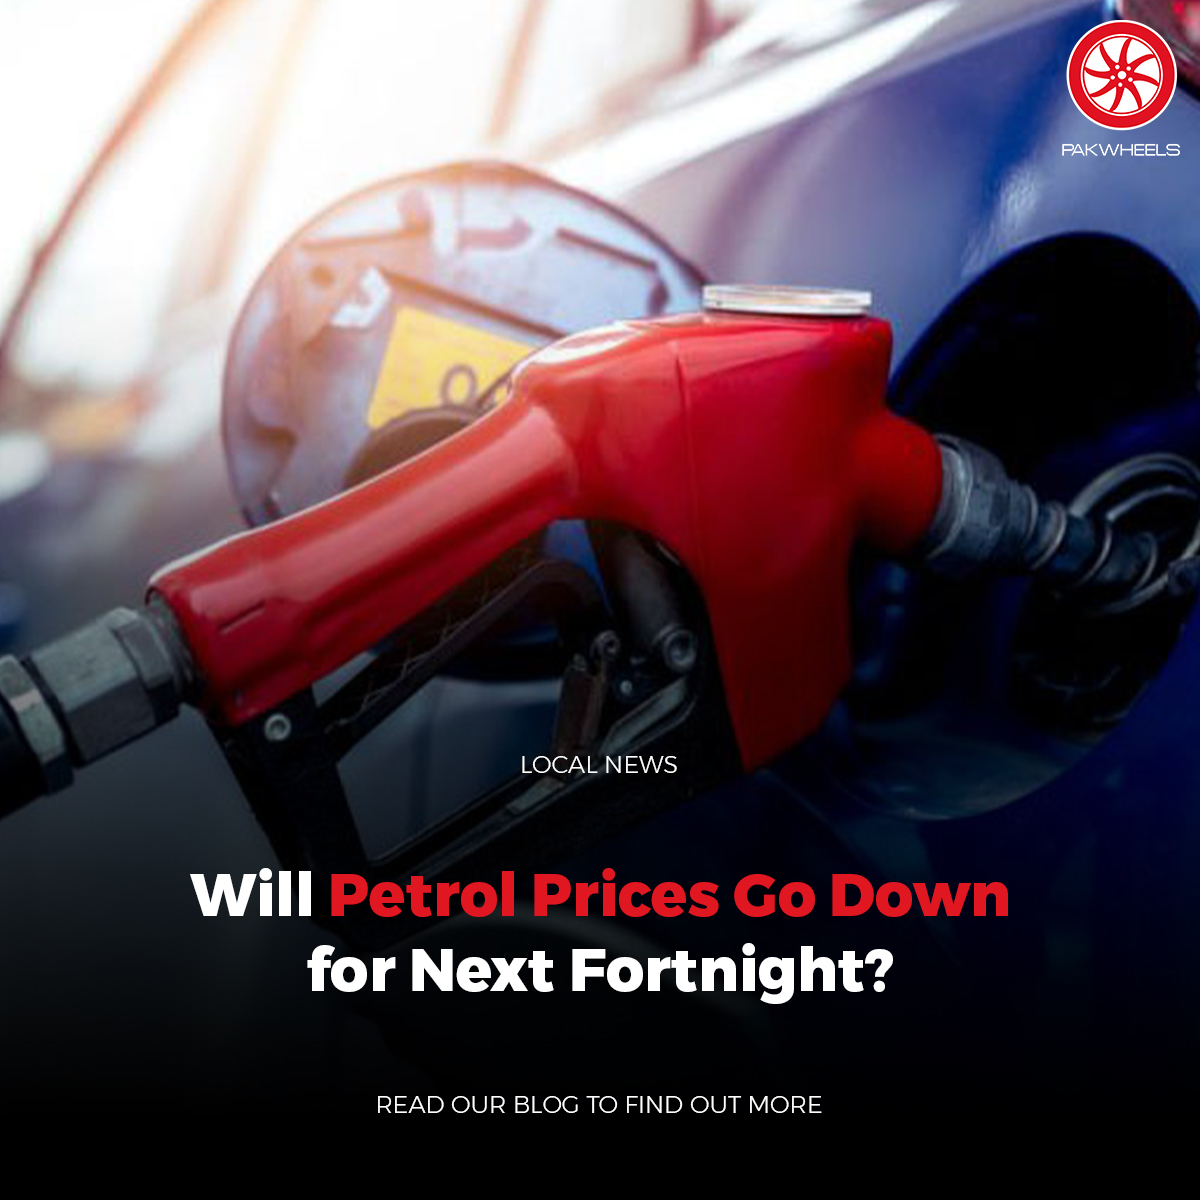 Today is March 14th, and the revision in petrol prices in Pakistan is just a day away.

Click here to see more: ow.ly/JiSY50QT2ce

#PakWheels #PWBlogs #Petrol #PetrolPrices